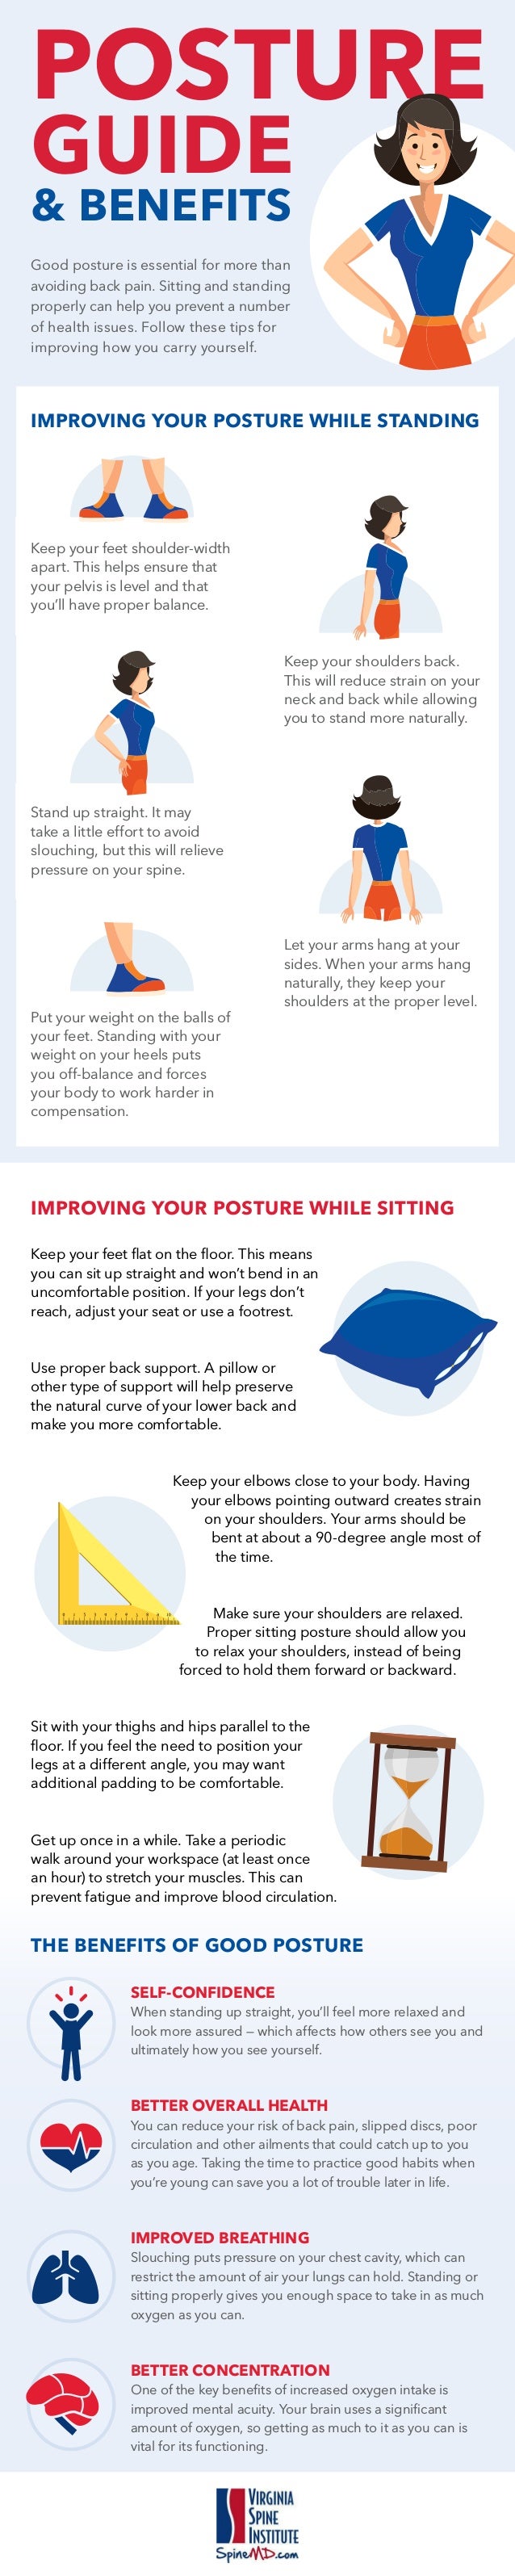 Benefits of Good Posture for Your Health & Happiness